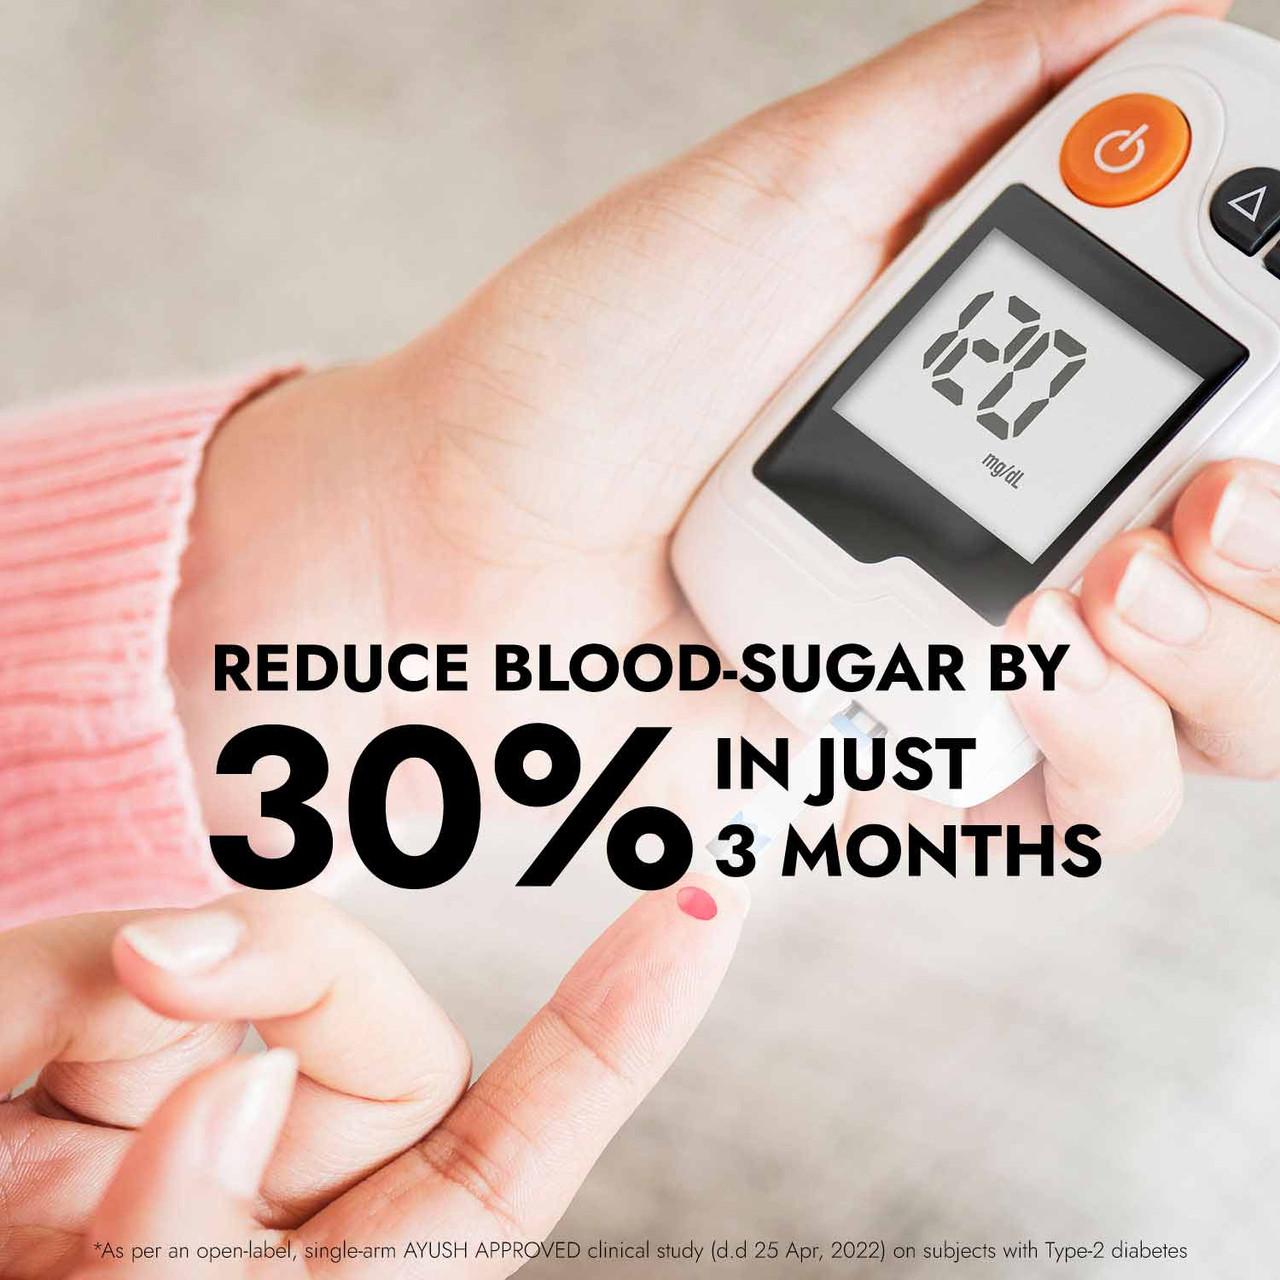 Dia Free Juice is clinically proven to reduce blood-sugar by 30% in just 3 months. 

Results are according to an open-label, single-arm AYUSH-approved clinical trial on subjects with Type-2 diabetes.